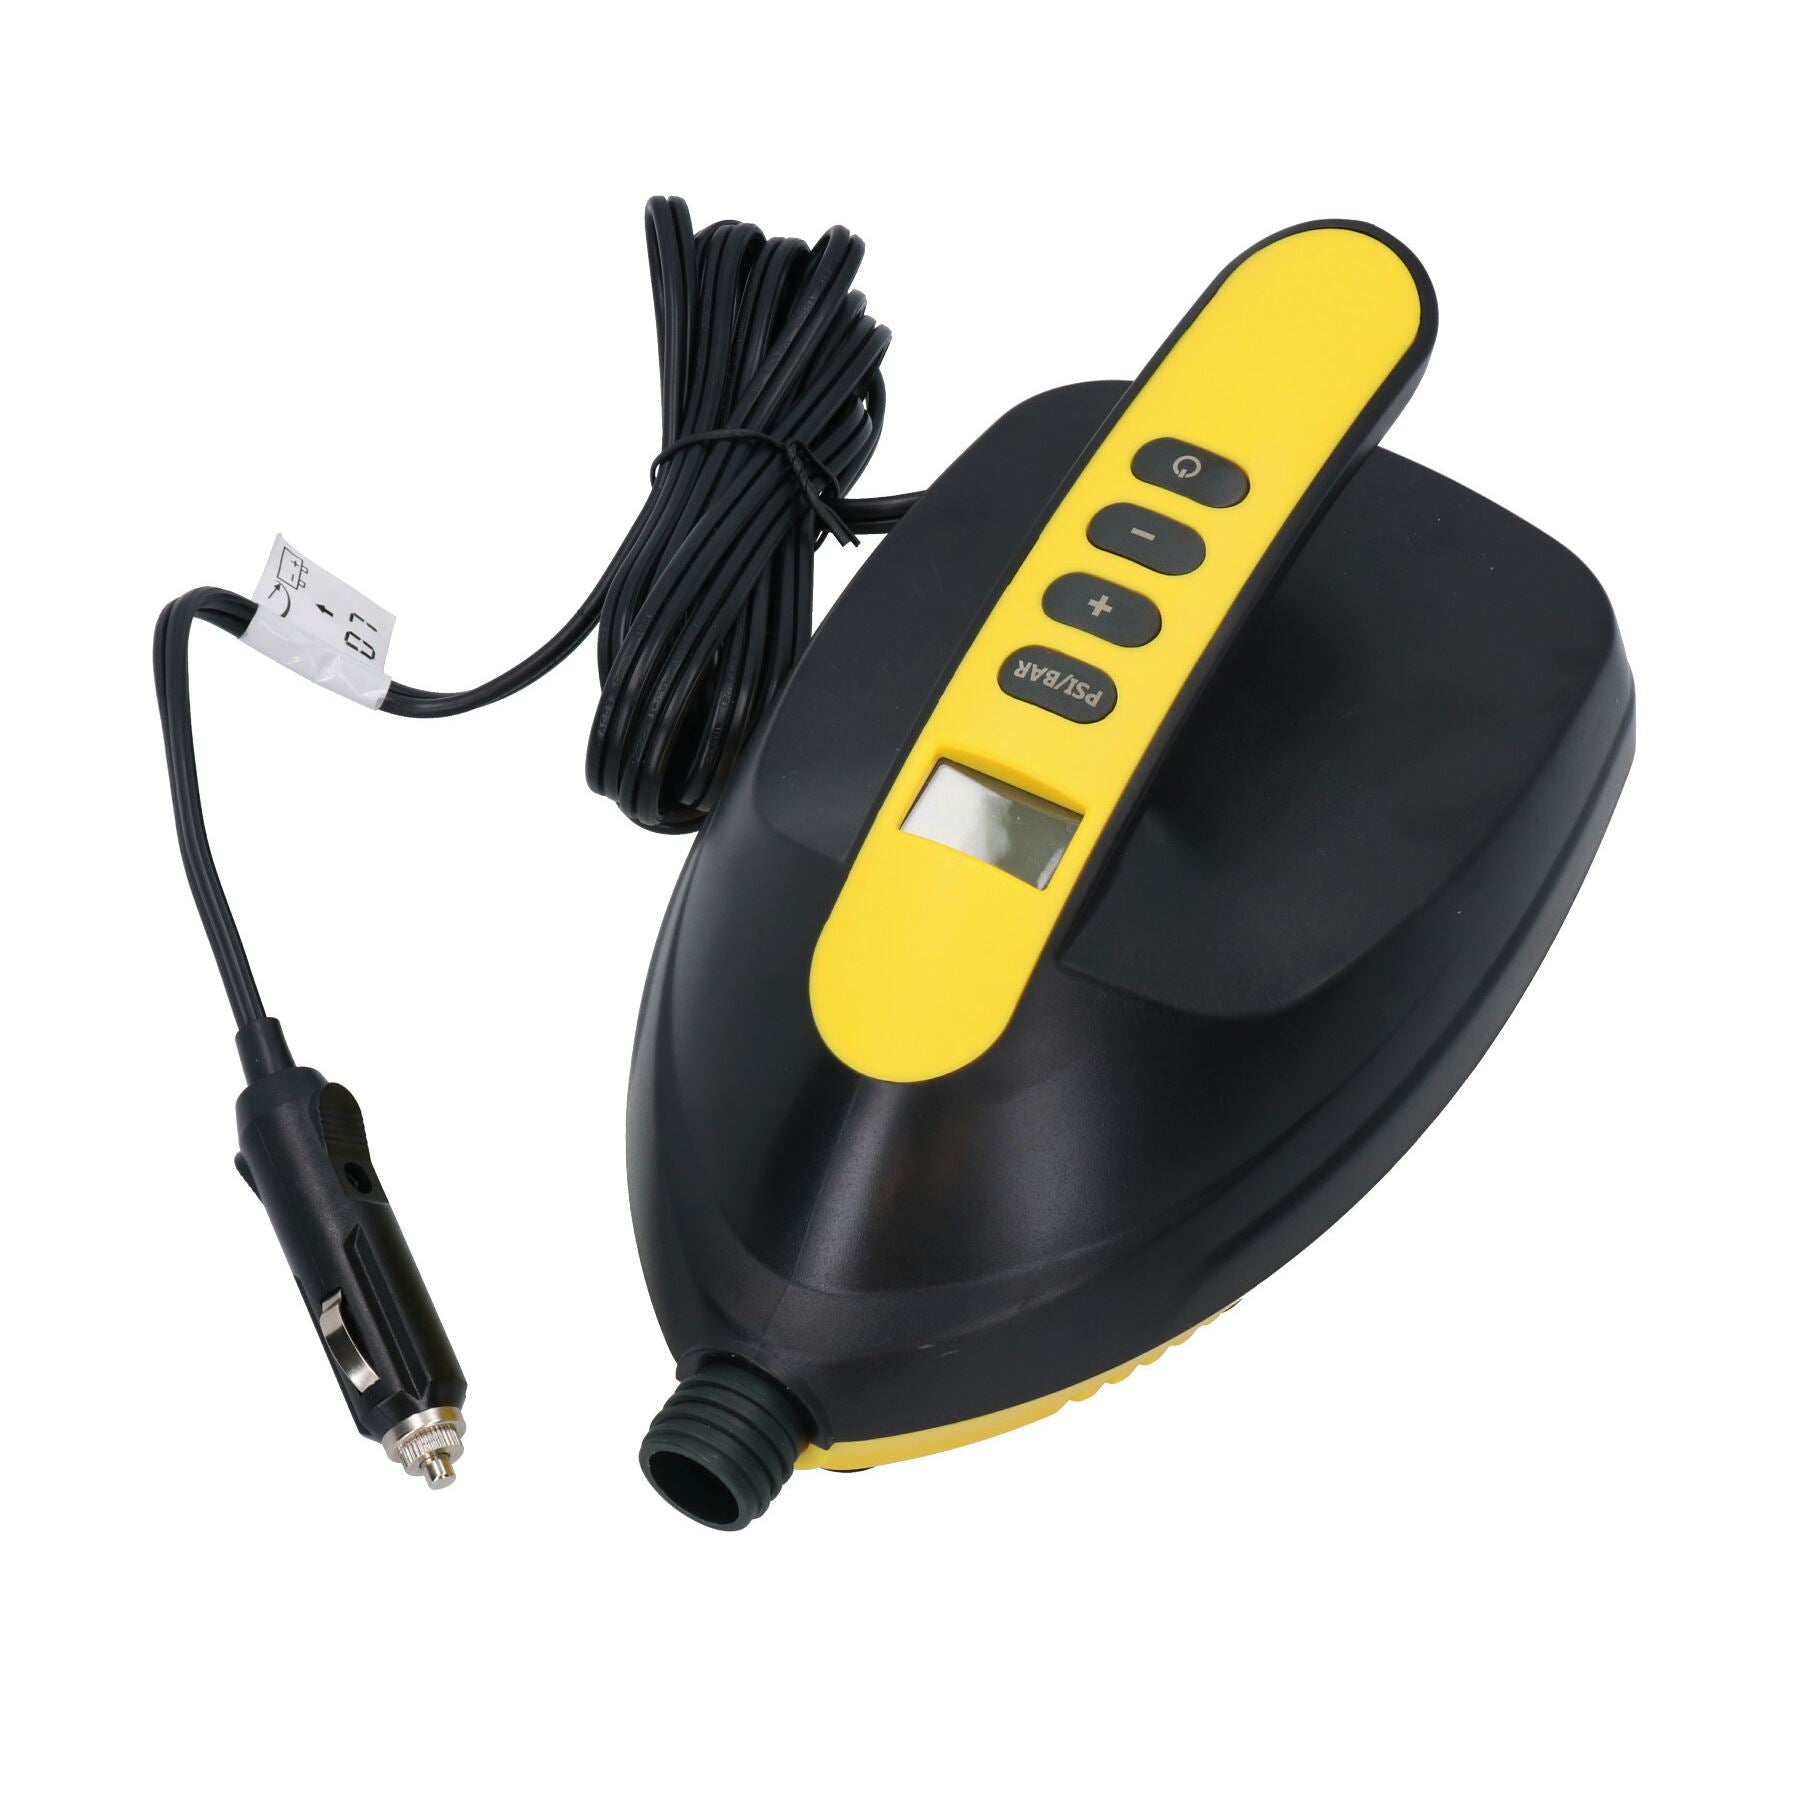 12v Electric Pump Automatic 16 PSI Air Inflator Paddle Board Inflatable Boat Kayak Toy